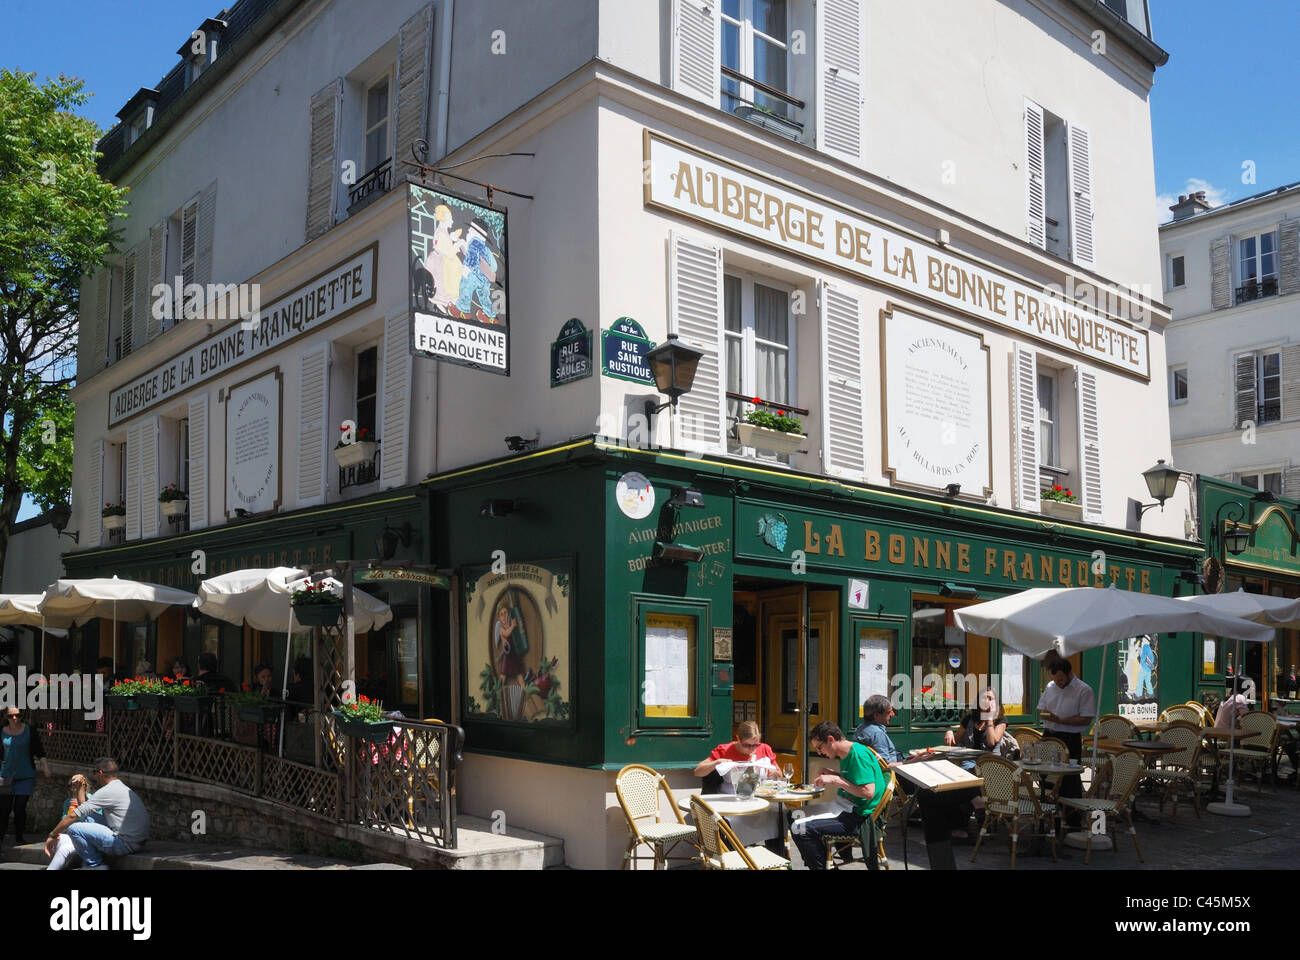 People eating outside a bistro restaurant in Montmartre, Paris Stock Photo